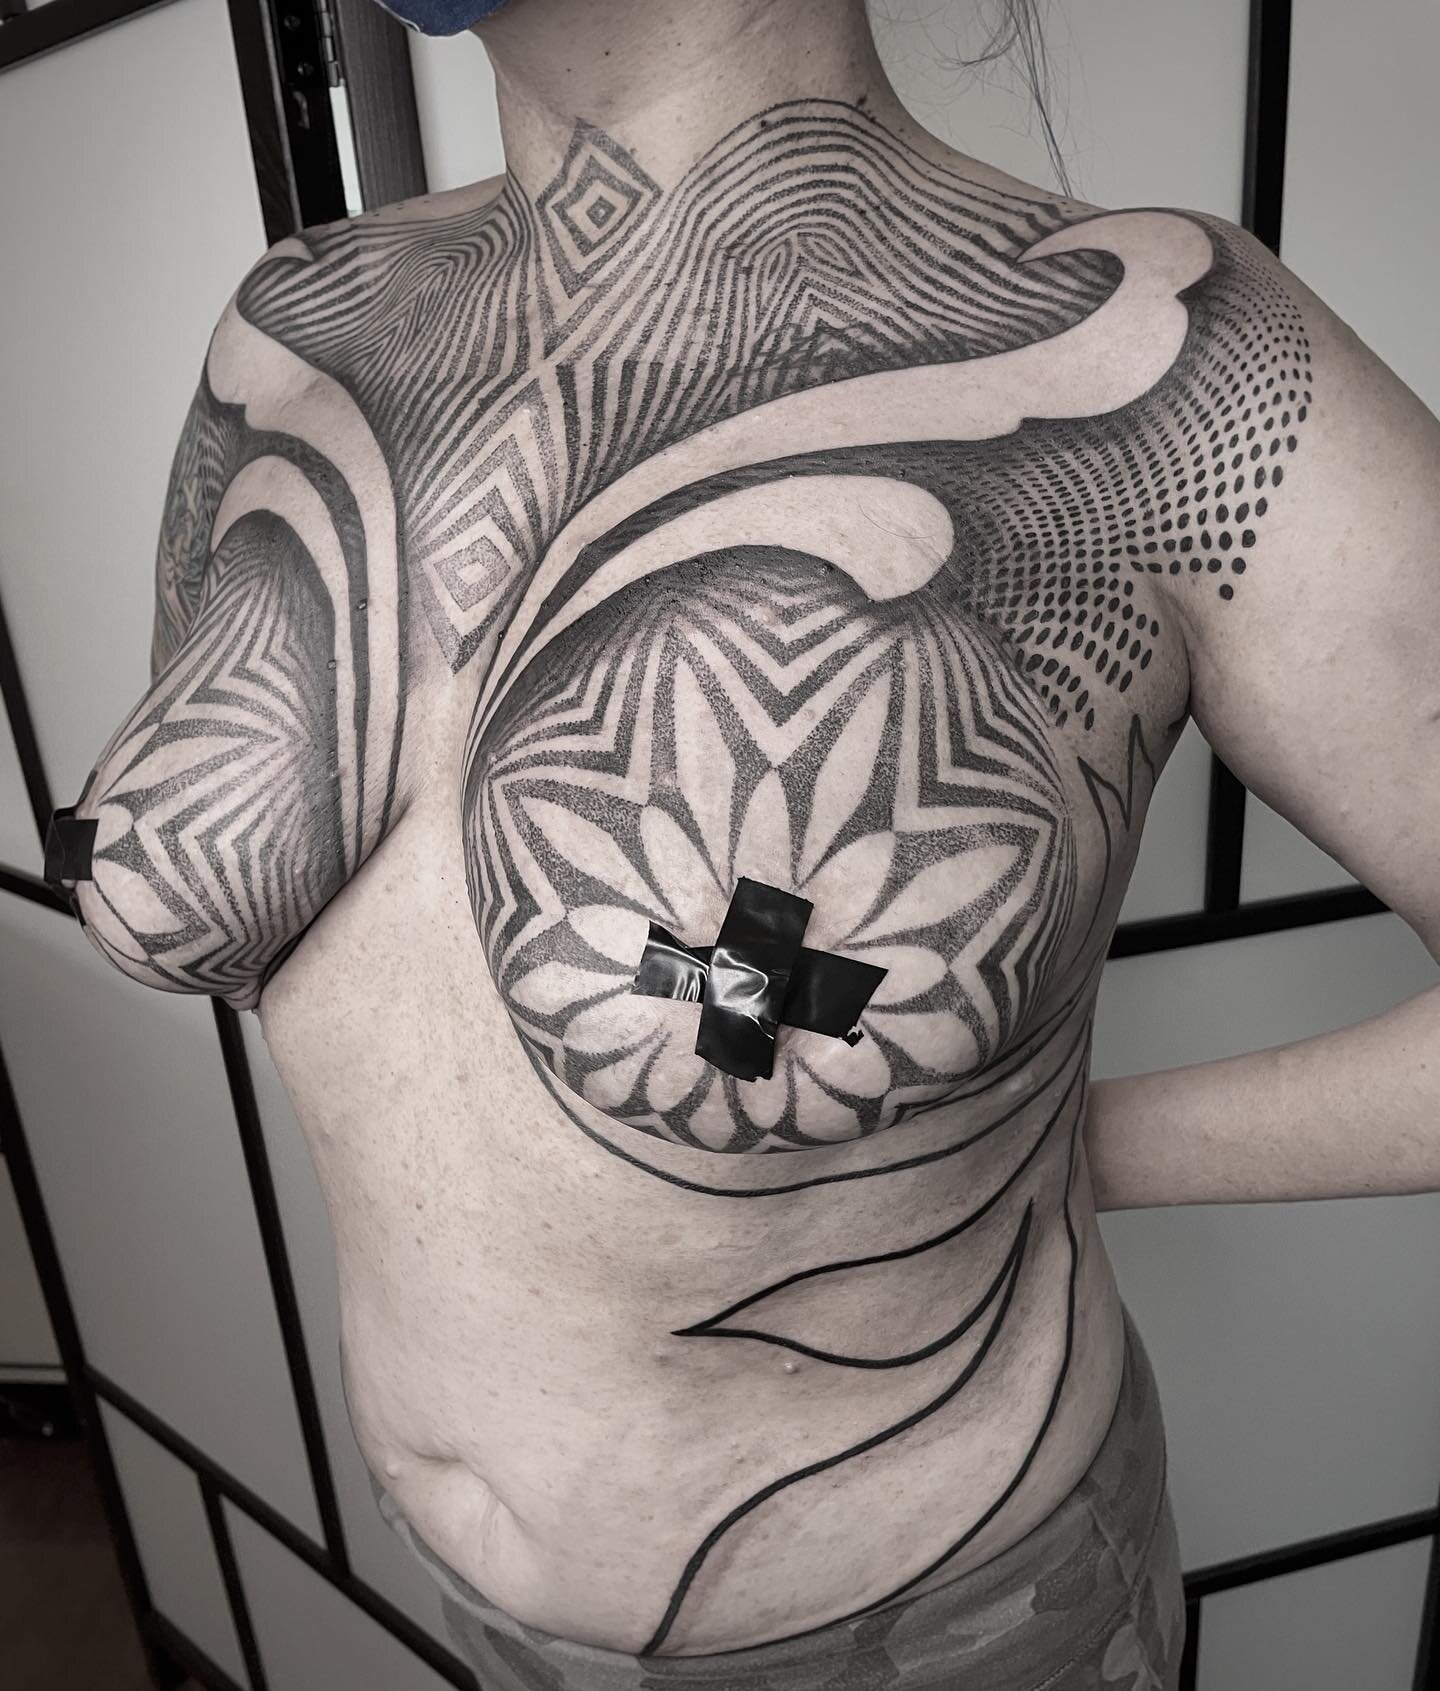 More progress on this full front torso 🤘must agree with how tattoos feel to do something on this scale #respect #beastmode #blackandgray #geometrictattoo #geometrip #opart #opticalillusiontattoo #ladytattooer #transformationtuesday #glowup #tttism #